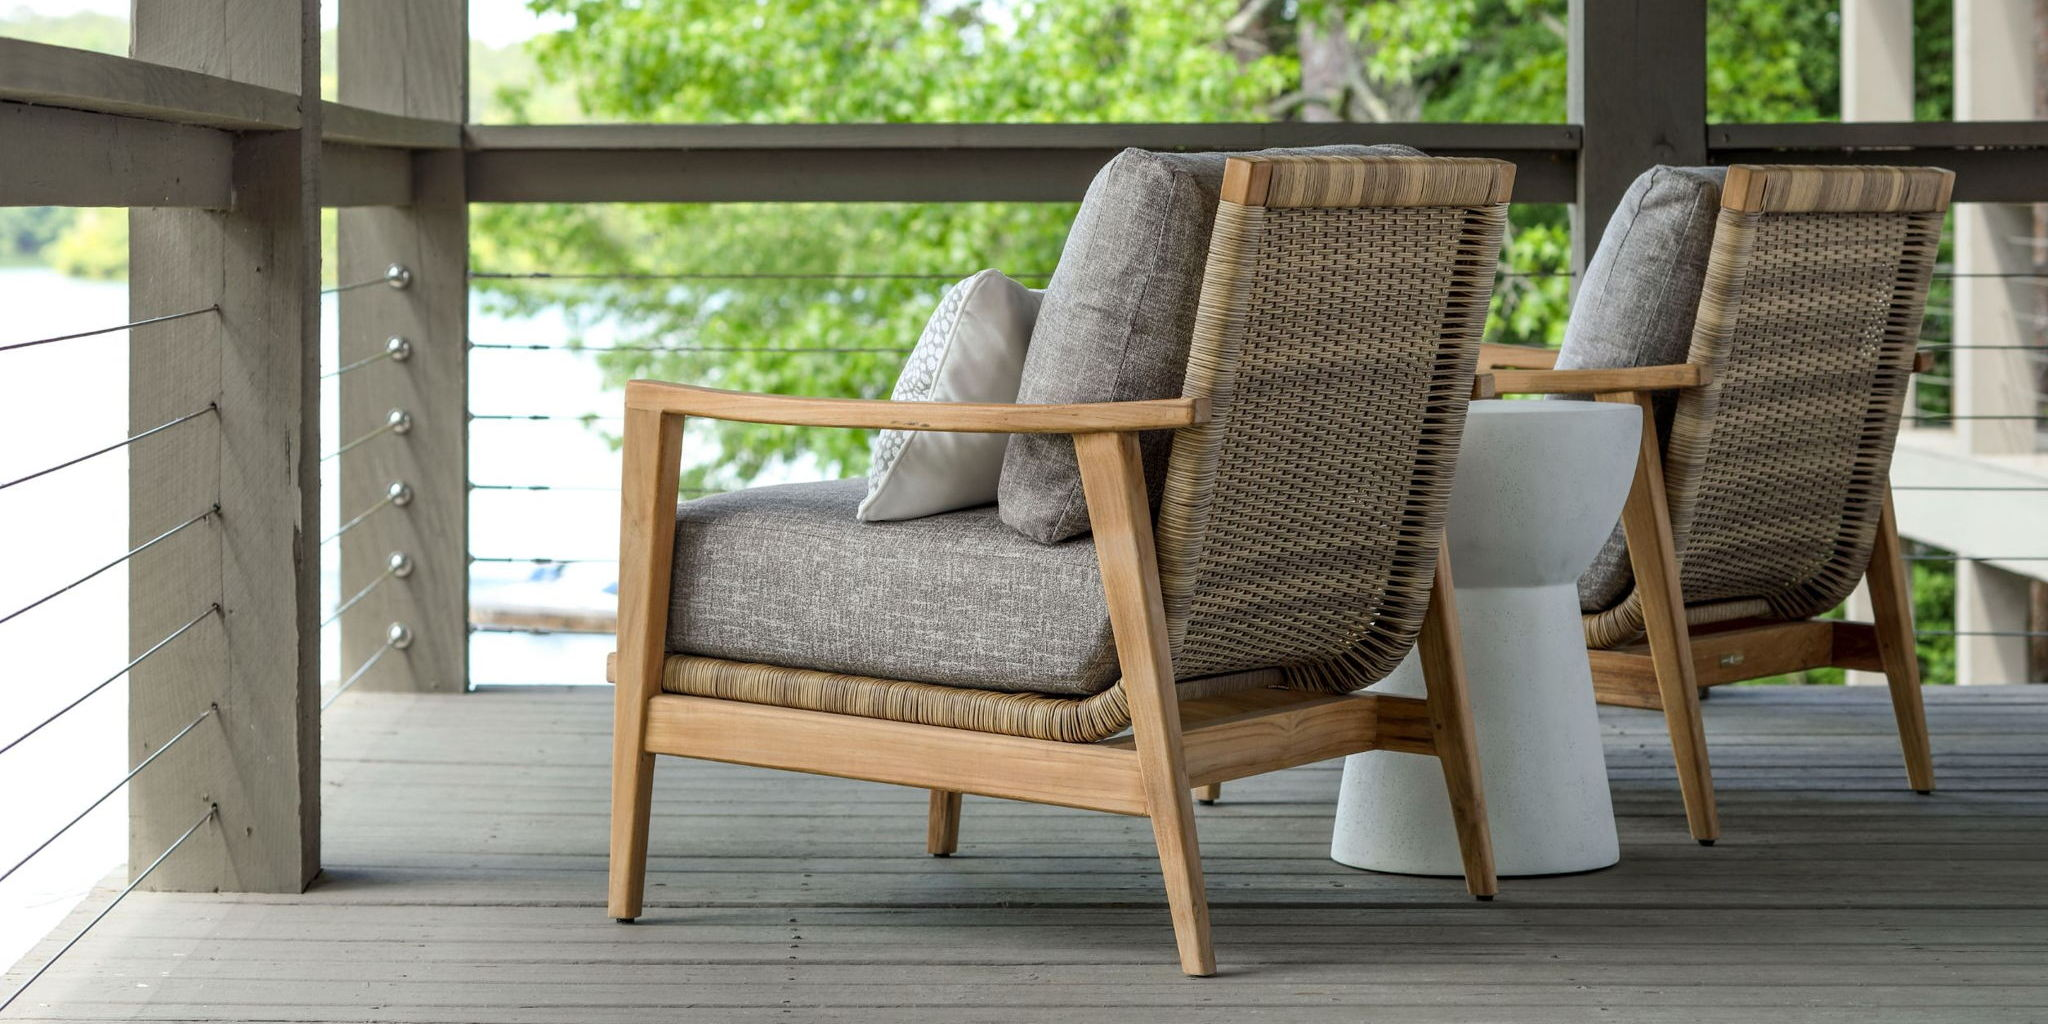 Summer is here with outdoor furniture